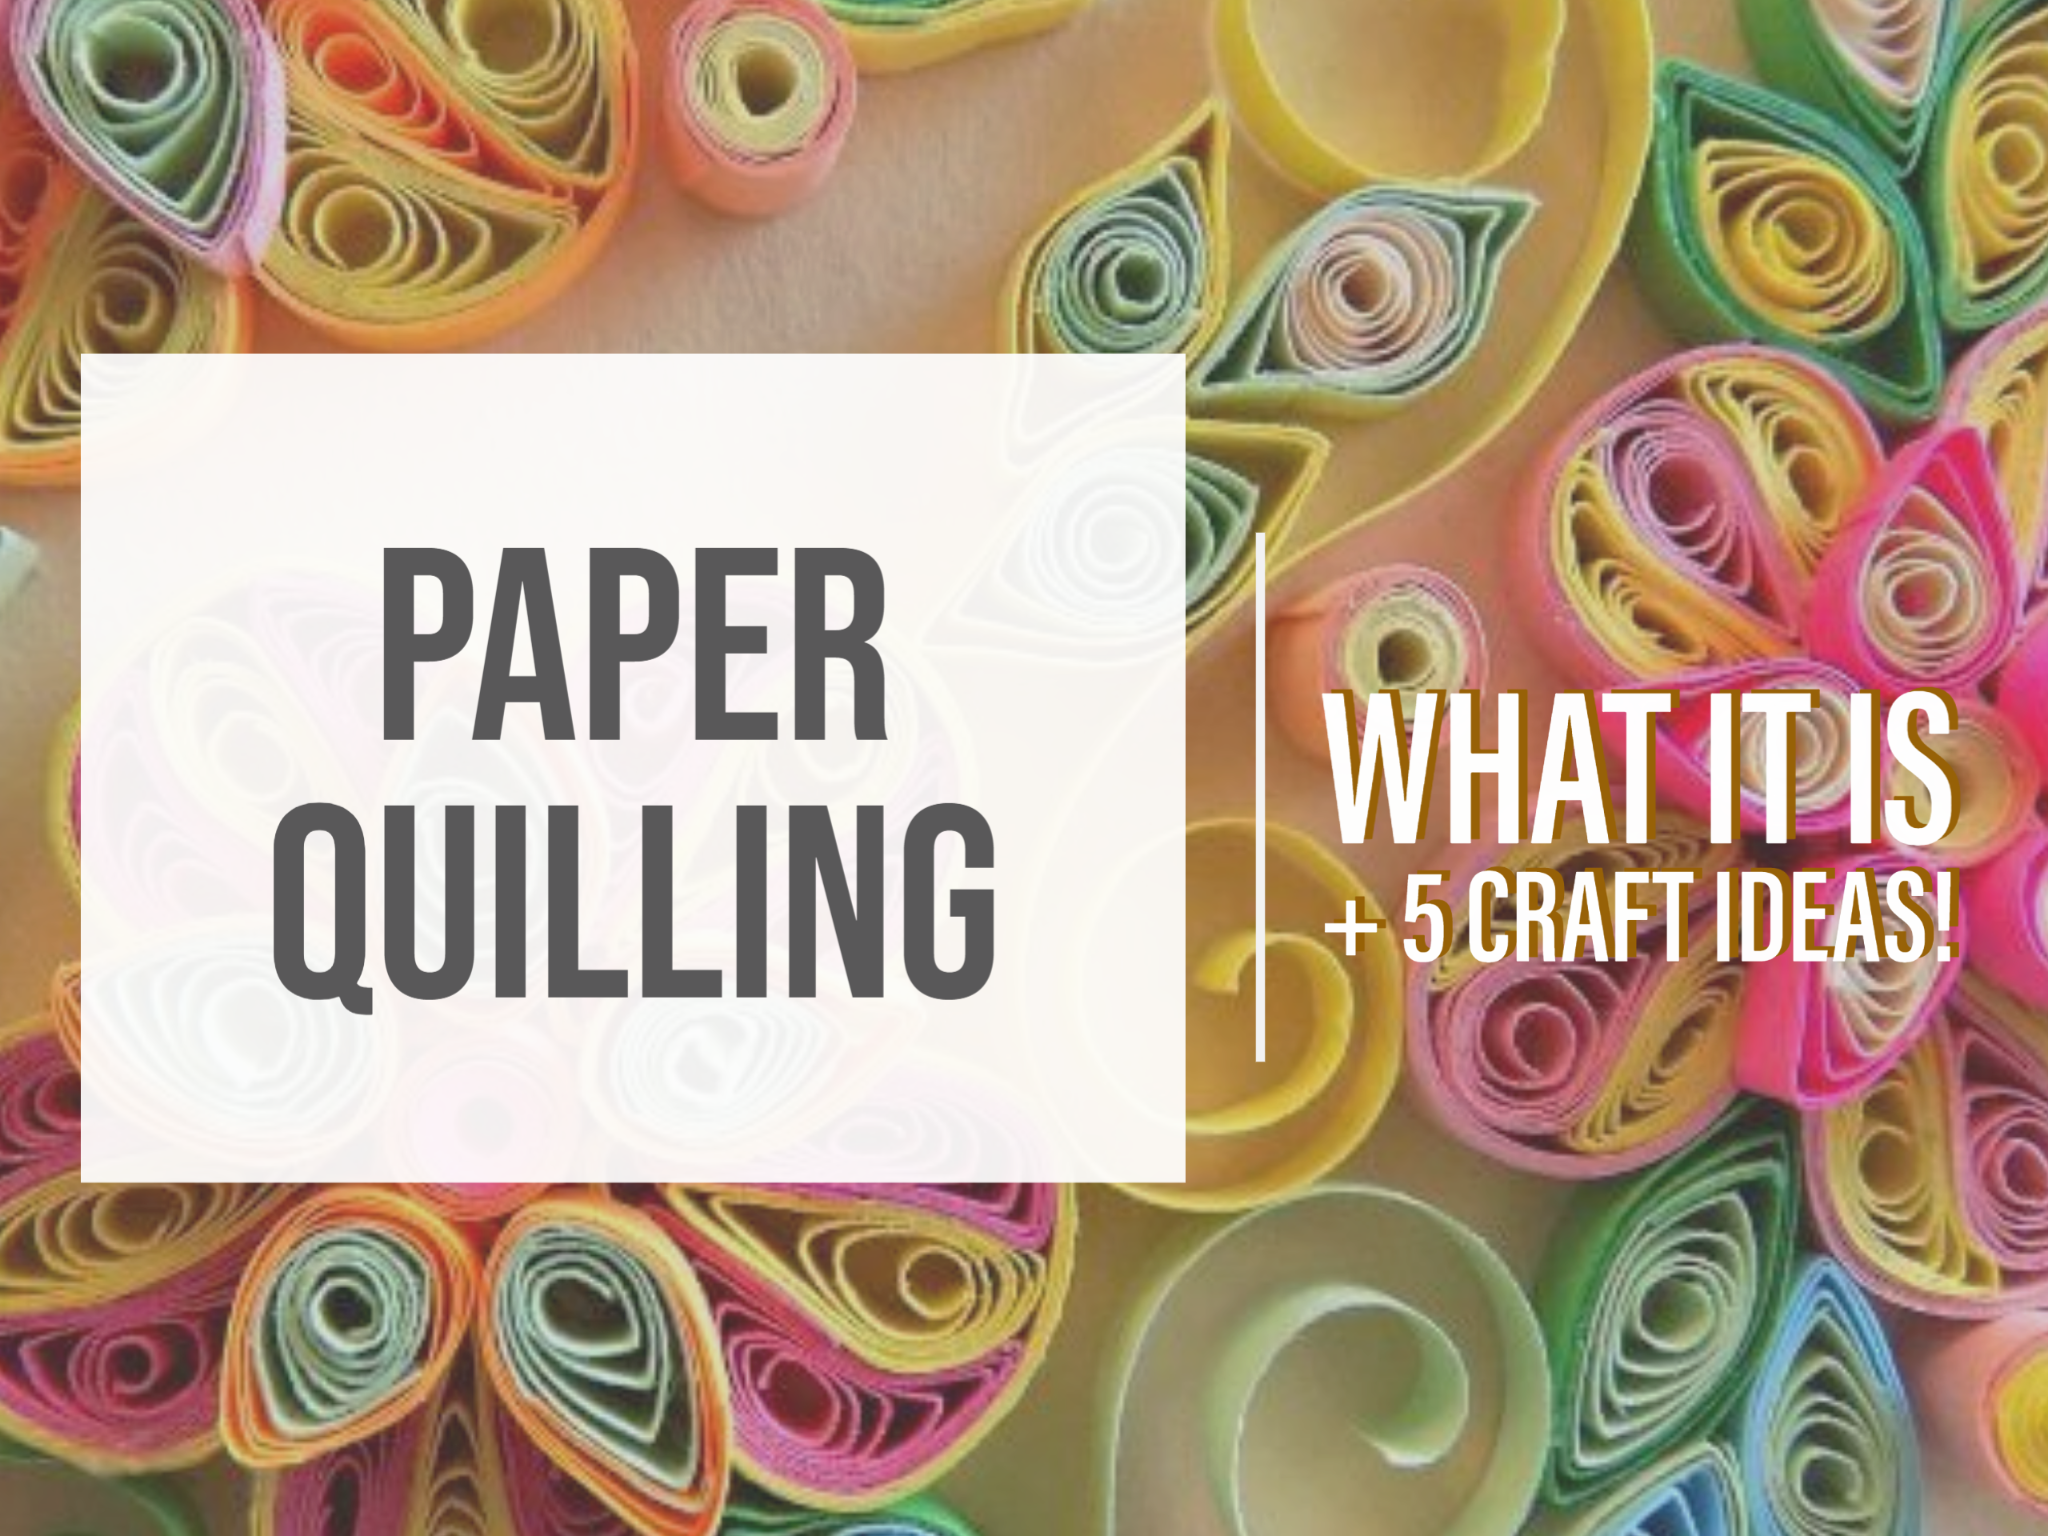 What is Paper Quilling?